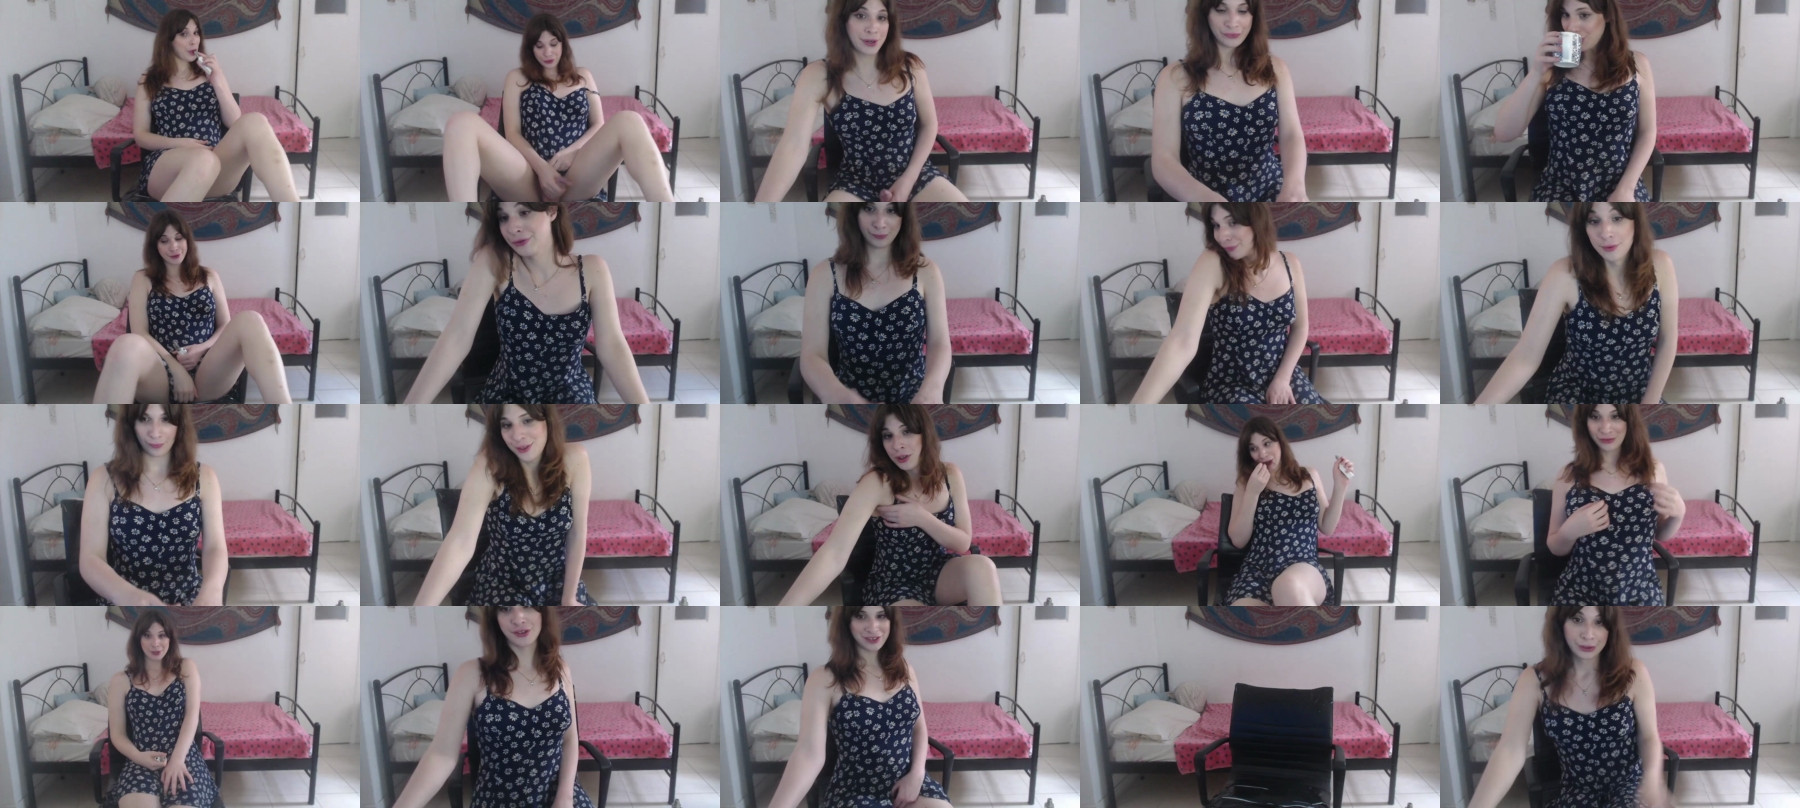 I_Miss_Behave Topless CAM SHOW @ Chaturbate 25-04-2021